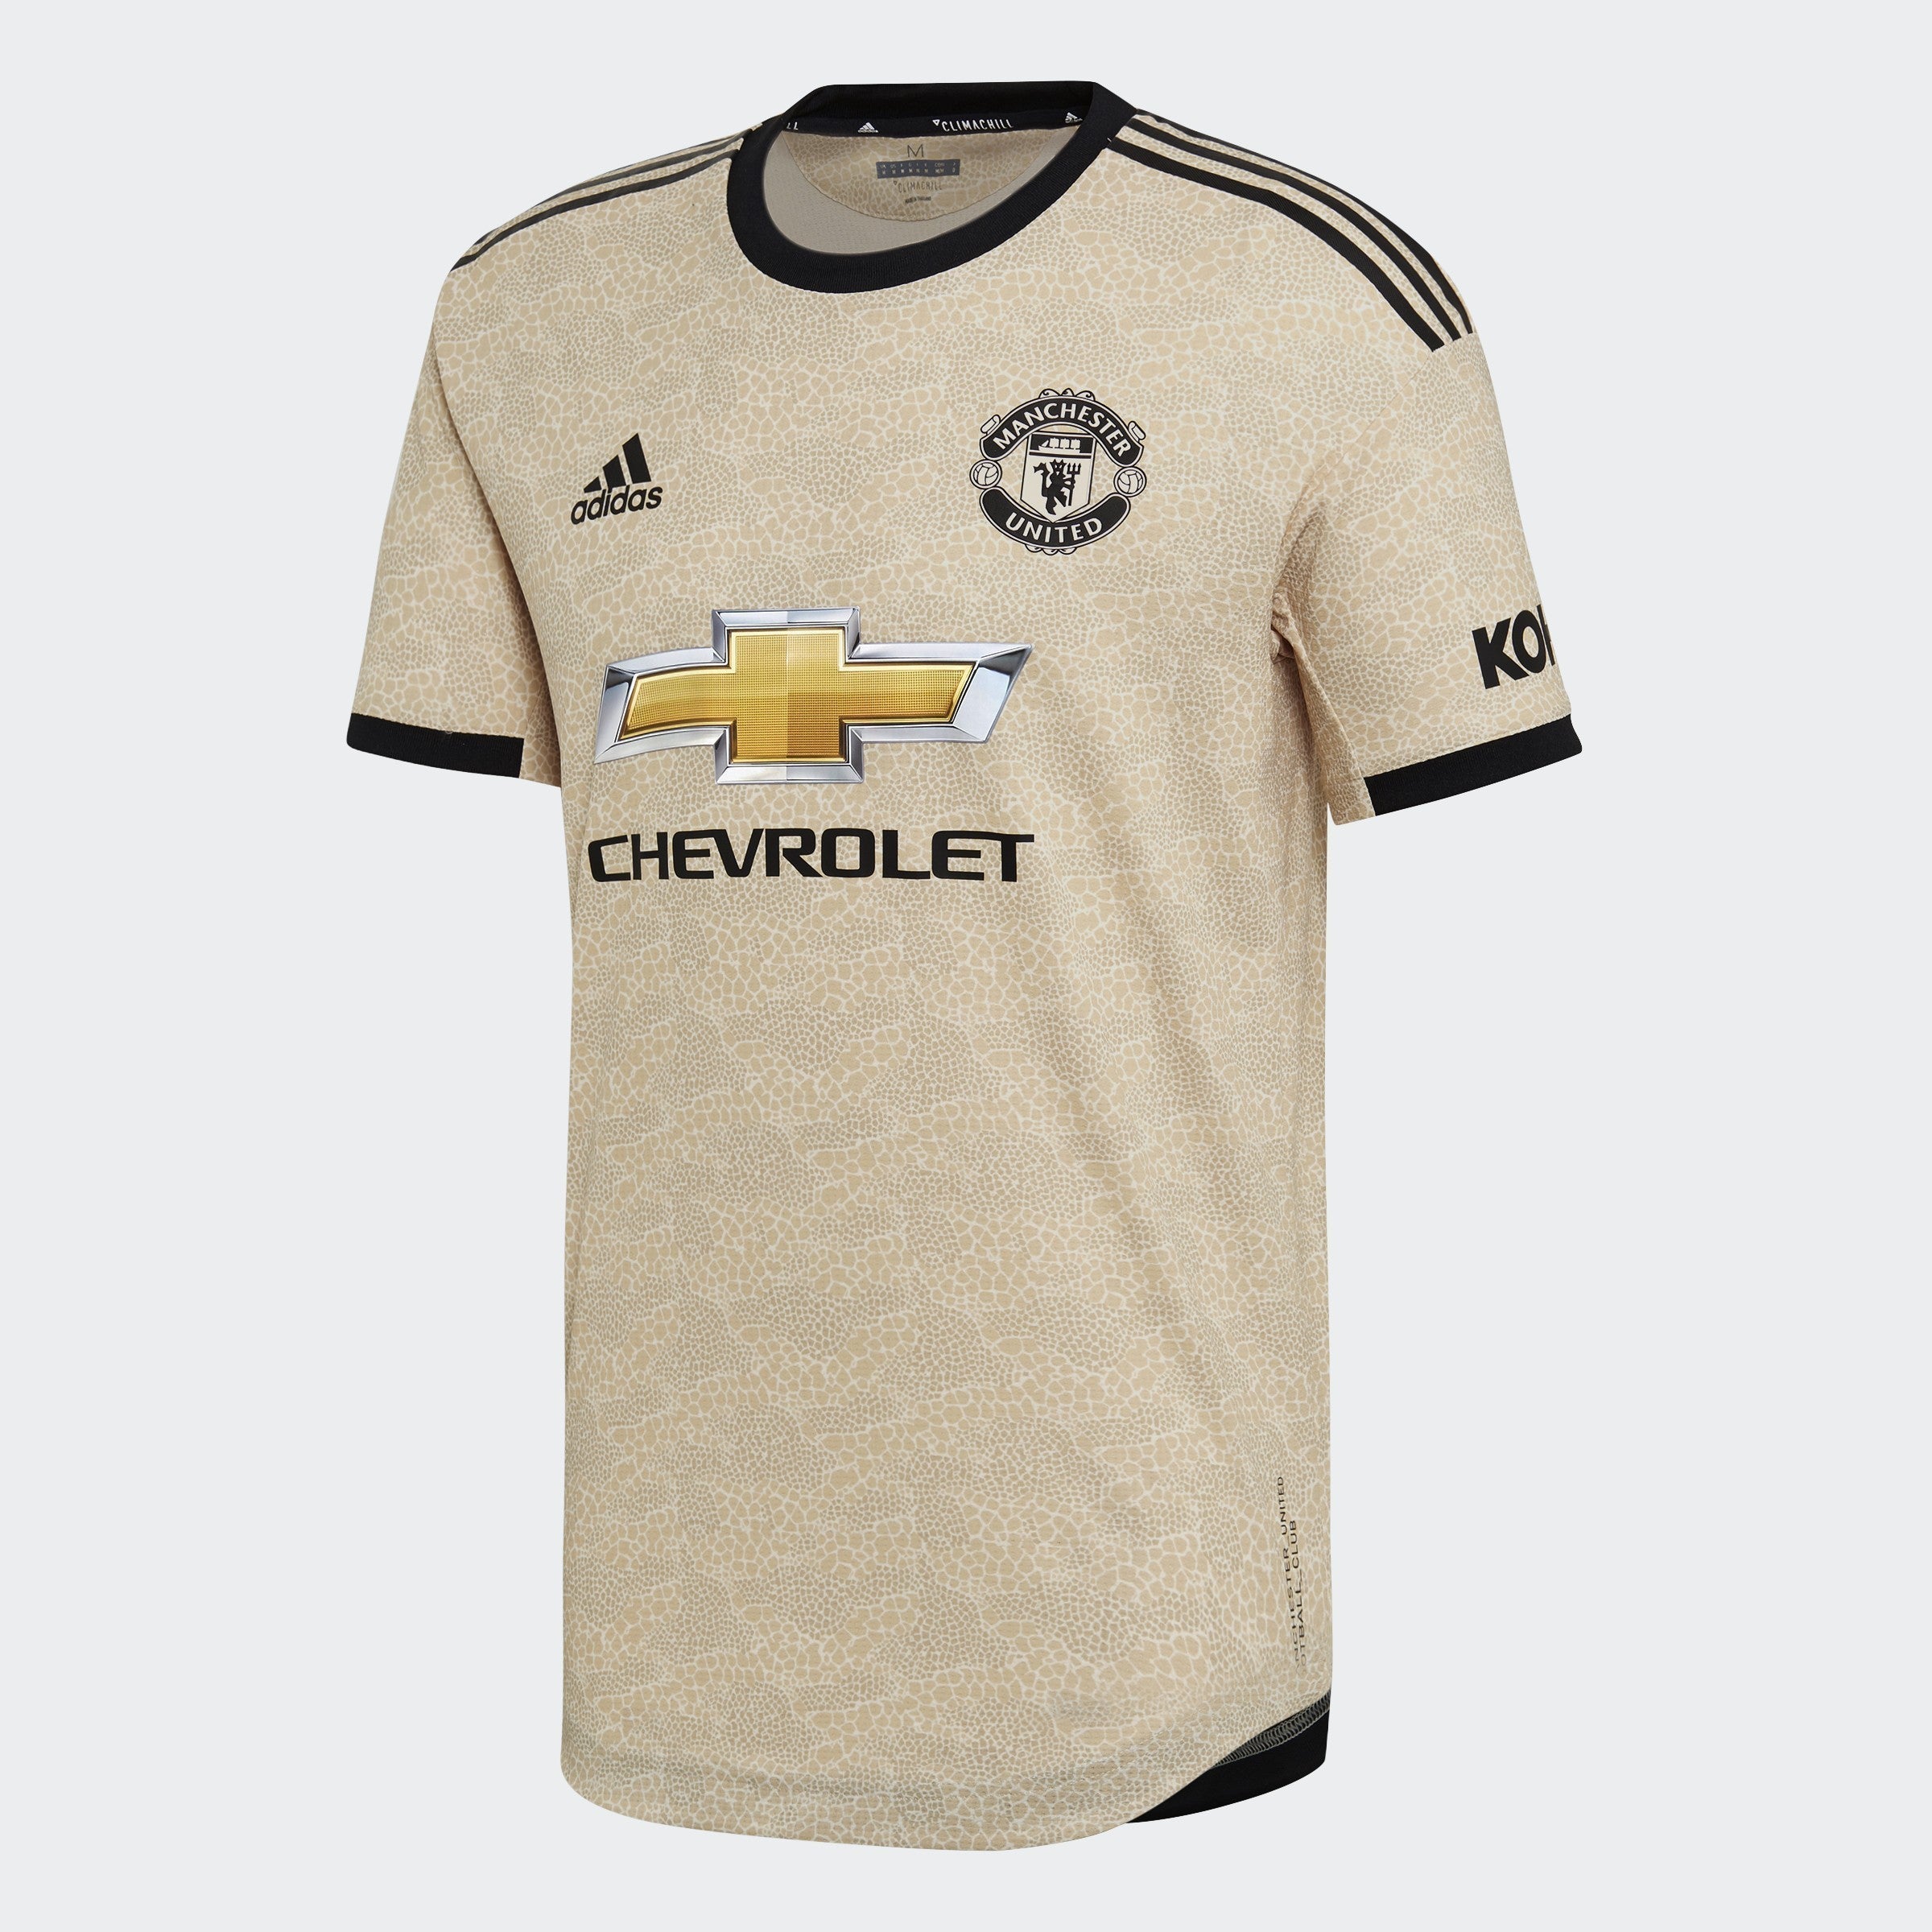 This Manchester United retro jersey is a thing of sheer beauty